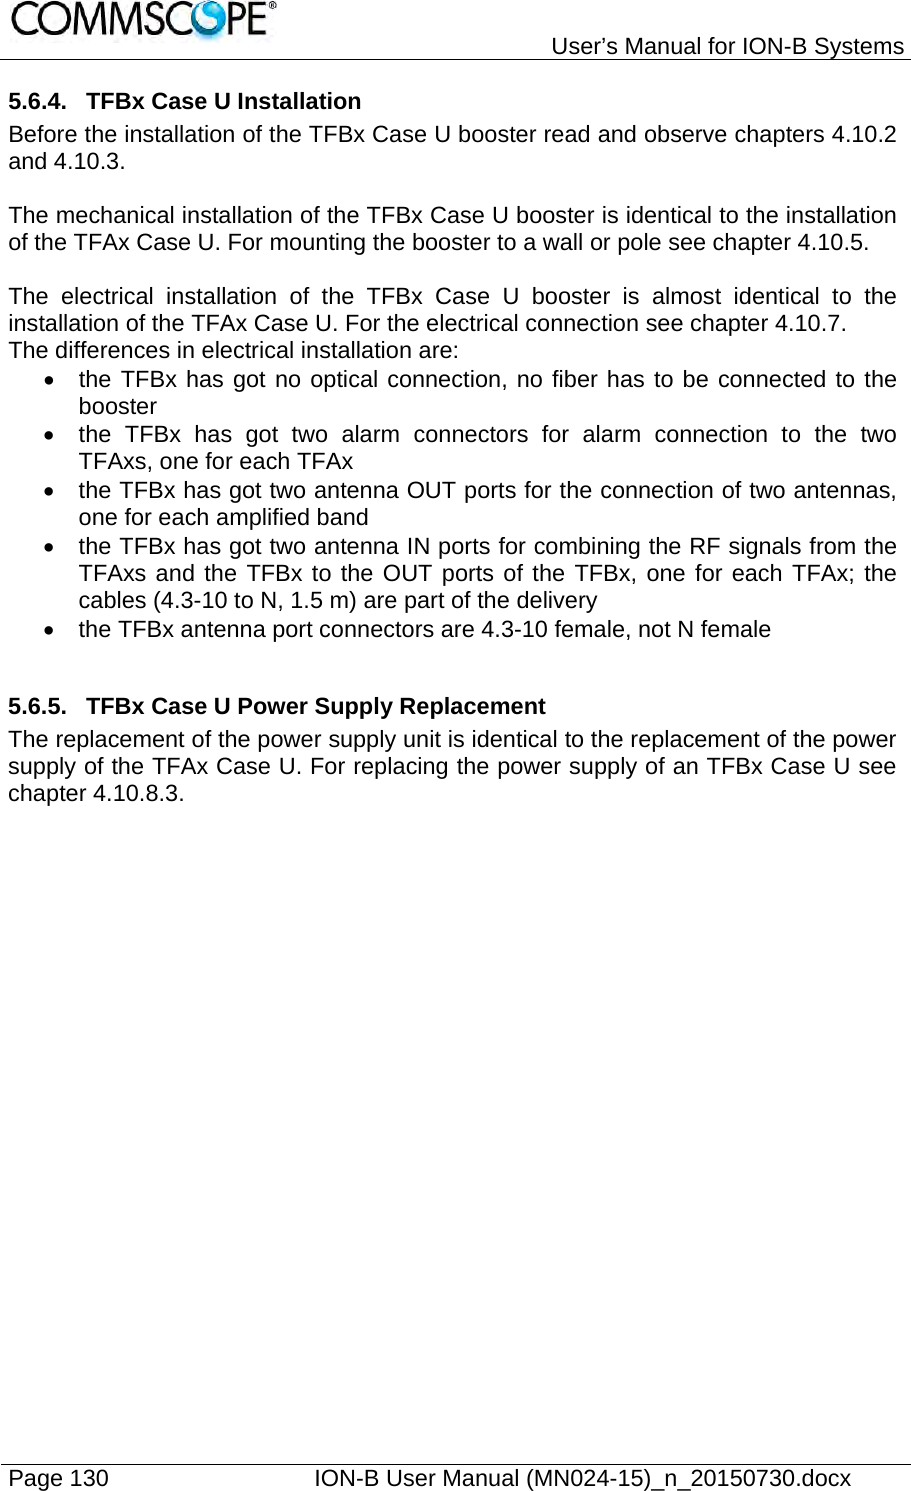   User’s Manual for ION-B Systems Page 130    ION-B User Manual (MN024-15)_n_20150730.docx  5.6.4.  TFBx Case U Installation Before the installation of the TFBx Case U booster read and observe chapters 4.10.2 and 4.10.3.  The mechanical installation of the TFBx Case U booster is identical to the installation of the TFAx Case U. For mounting the booster to a wall or pole see chapter 4.10.5.  The electrical installation of the TFBx Case U booster is almost identical to the installation of the TFAx Case U. For the electrical connection see chapter 4.10.7.  The differences in electrical installation are:   the TFBx has got no optical connection, no fiber has to be connected to the booster   the TFBx has got two alarm connectors for alarm connection to the two TFAxs, one for each TFAx   the TFBx has got two antenna OUT ports for the connection of two antennas, one for each amplified band   the TFBx has got two antenna IN ports for combining the RF signals from the TFAxs and the TFBx to the OUT ports of the TFBx, one for each TFAx; the cables (4.3-10 to N, 1.5 m) are part of the delivery   the TFBx antenna port connectors are 4.3-10 female, not N female  5.6.5.  TFBx Case U Power Supply Replacement The replacement of the power supply unit is identical to the replacement of the power supply of the TFAx Case U. For replacing the power supply of an TFBx Case U see chapter 4.10.8.3. 